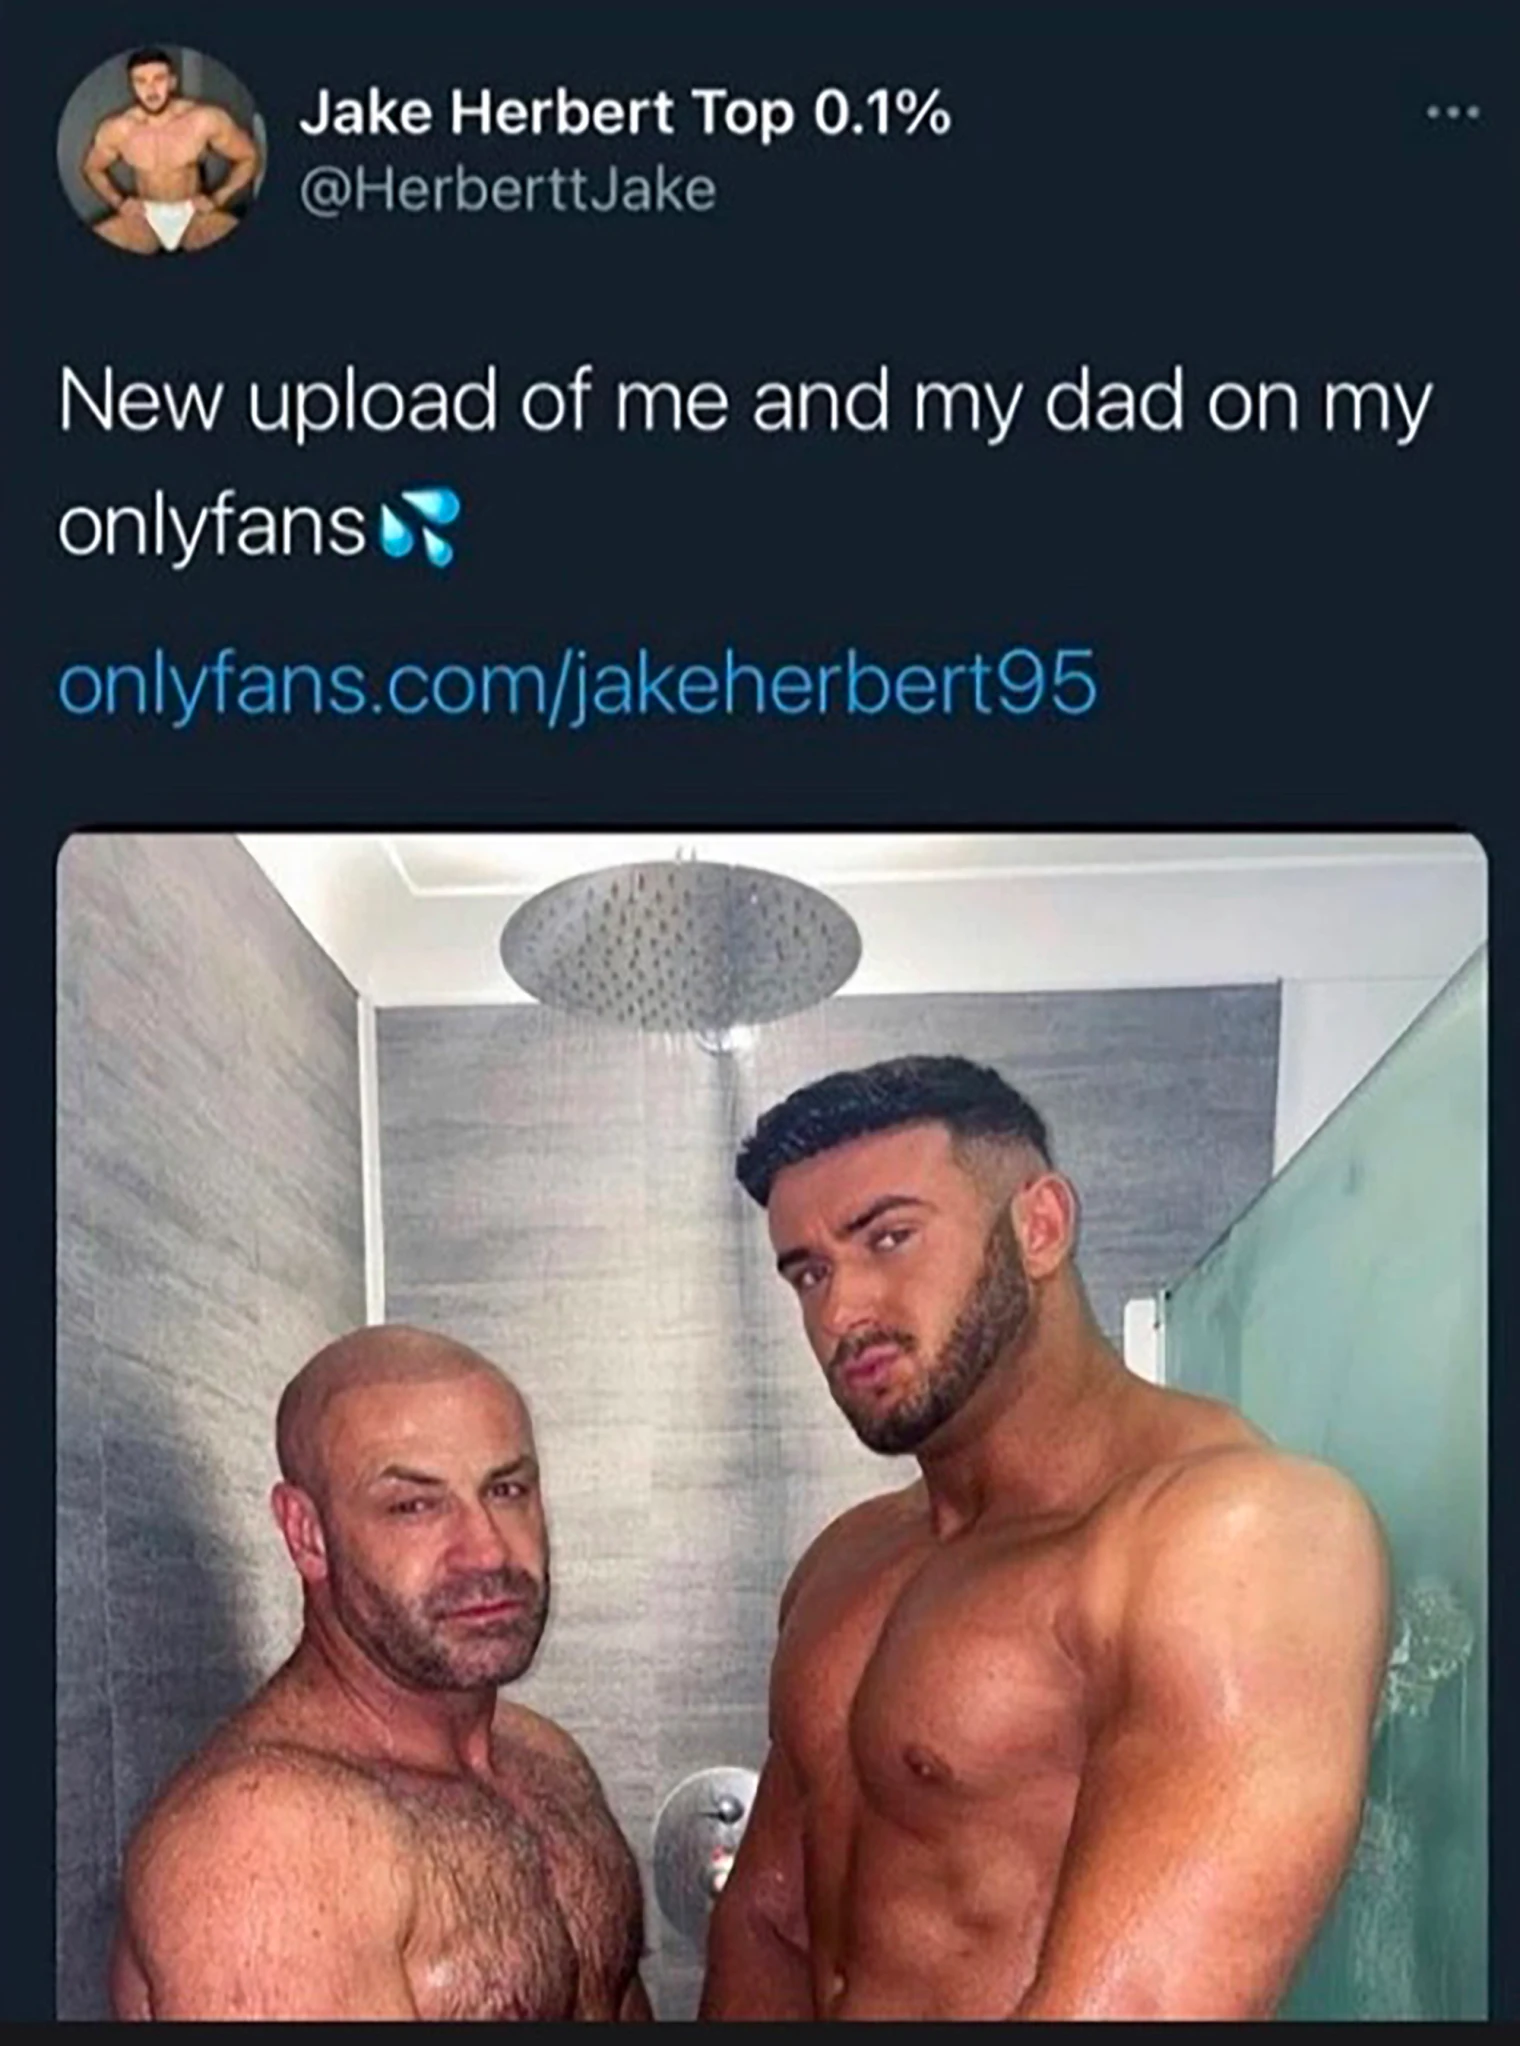 Man Makes A Fortune Doing Only Fans With Dad